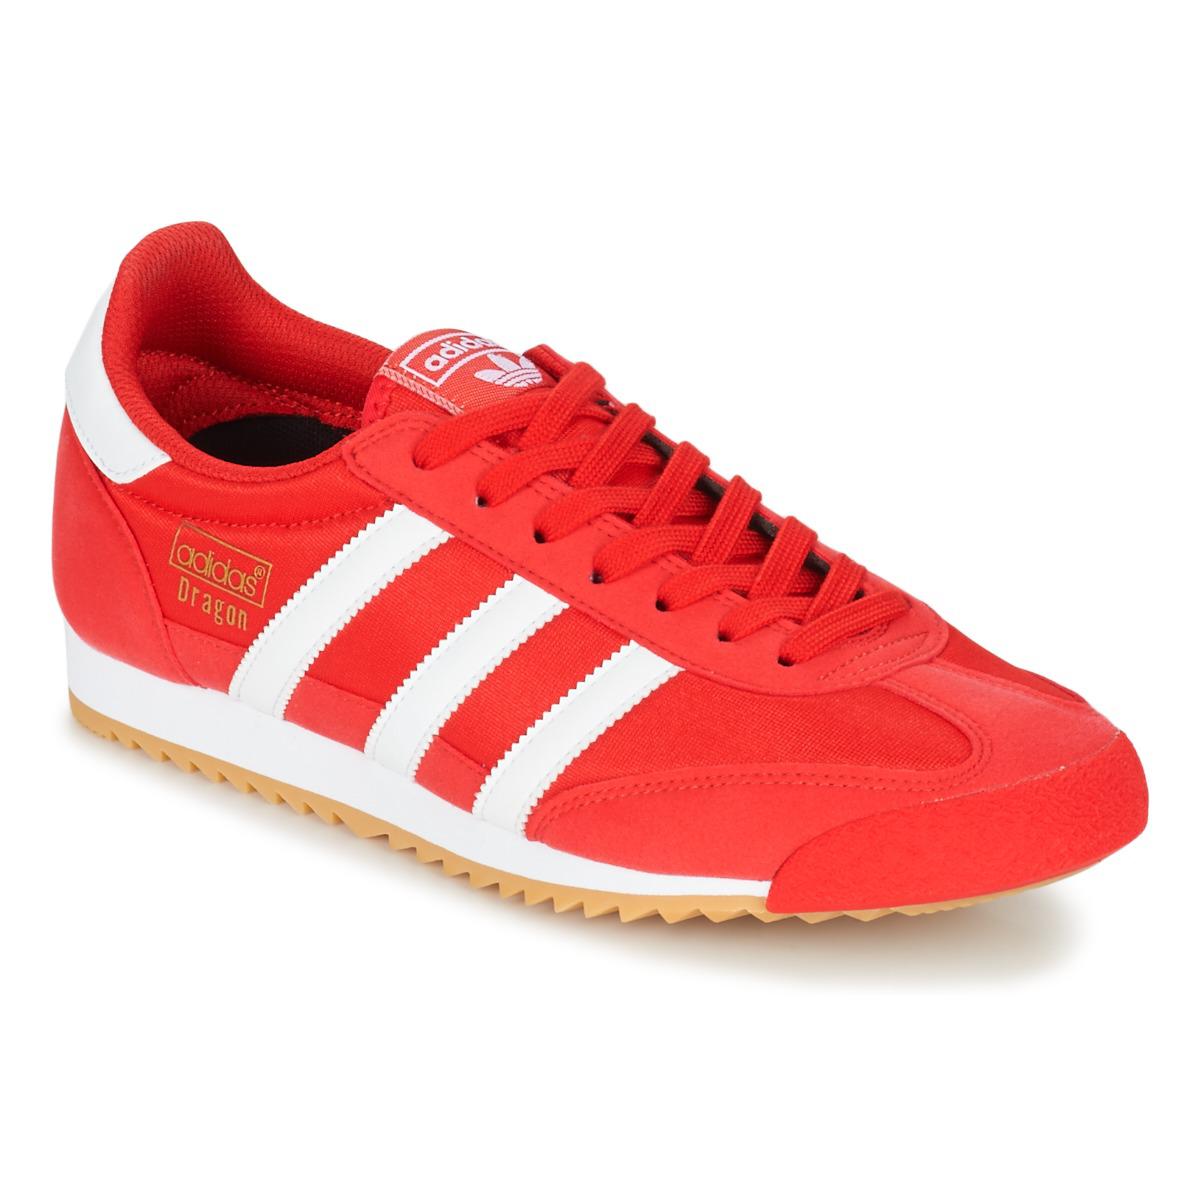 adidas 's Dragon Og Trainers in Red for Men - Lyst